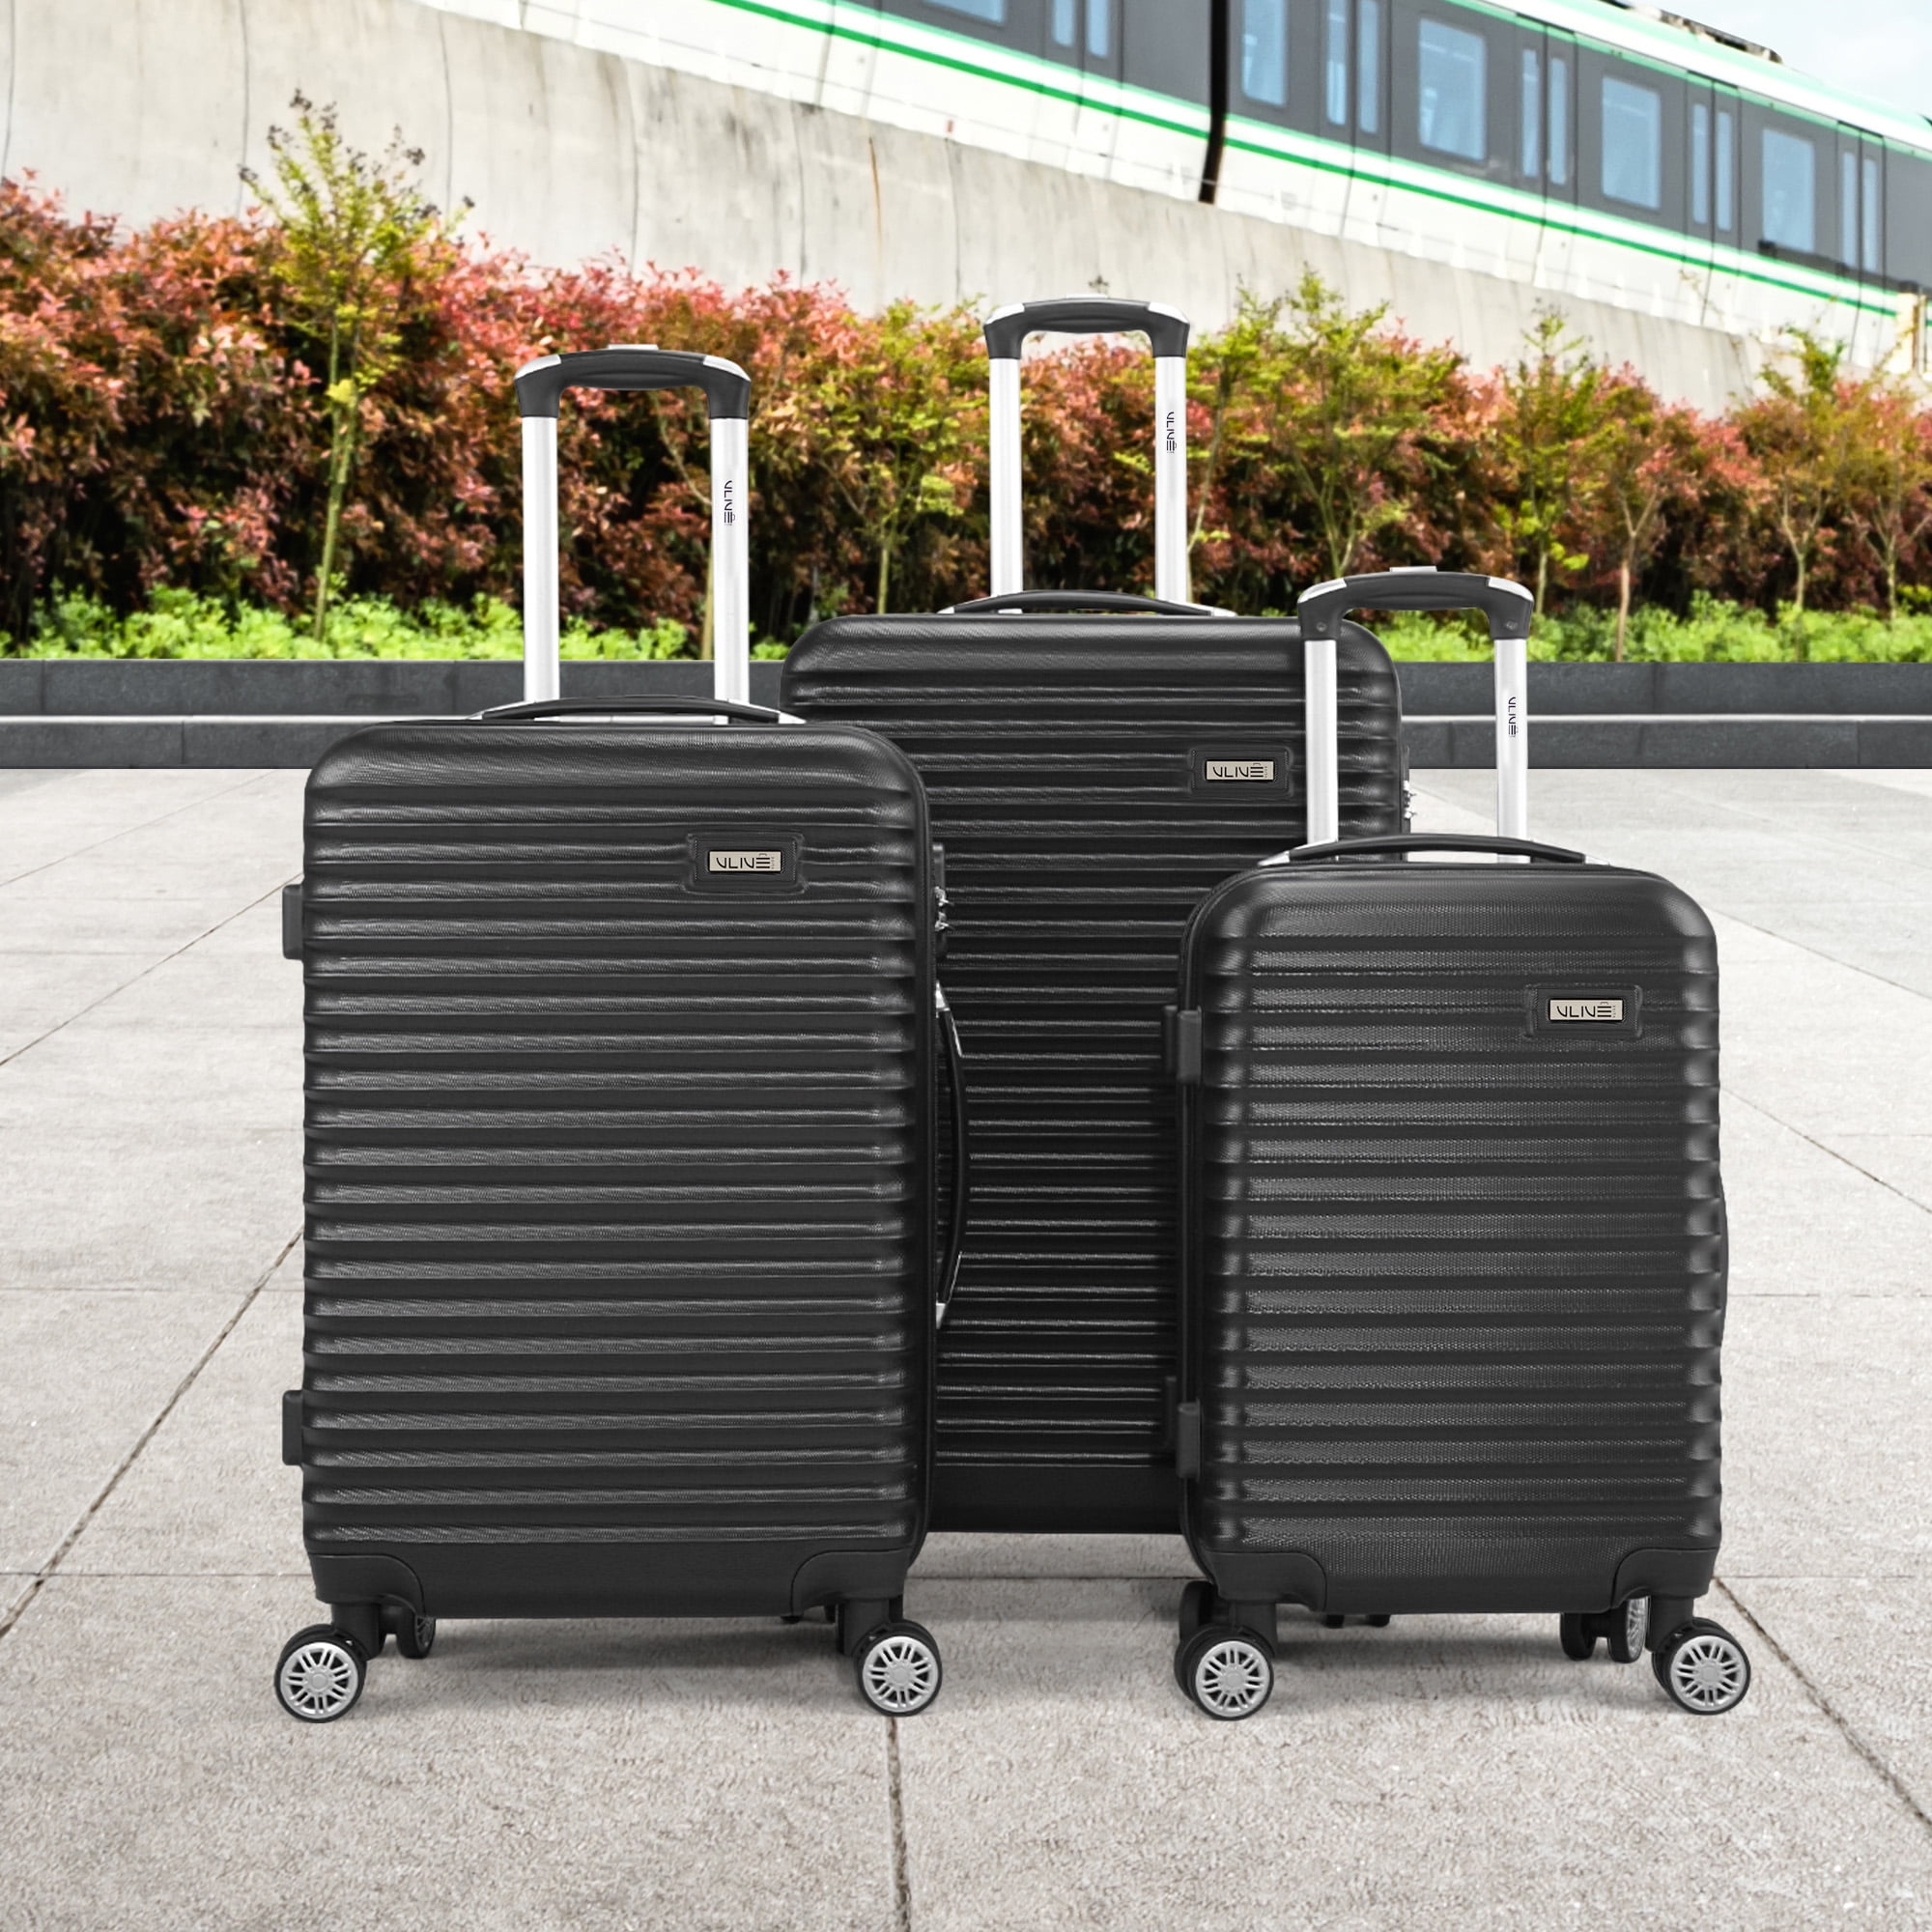 VLIVE  3 Pcs Luggage Set Hard Shell Travel Trolley Rolling Suitcase with 4 Wheels,20",24",28"